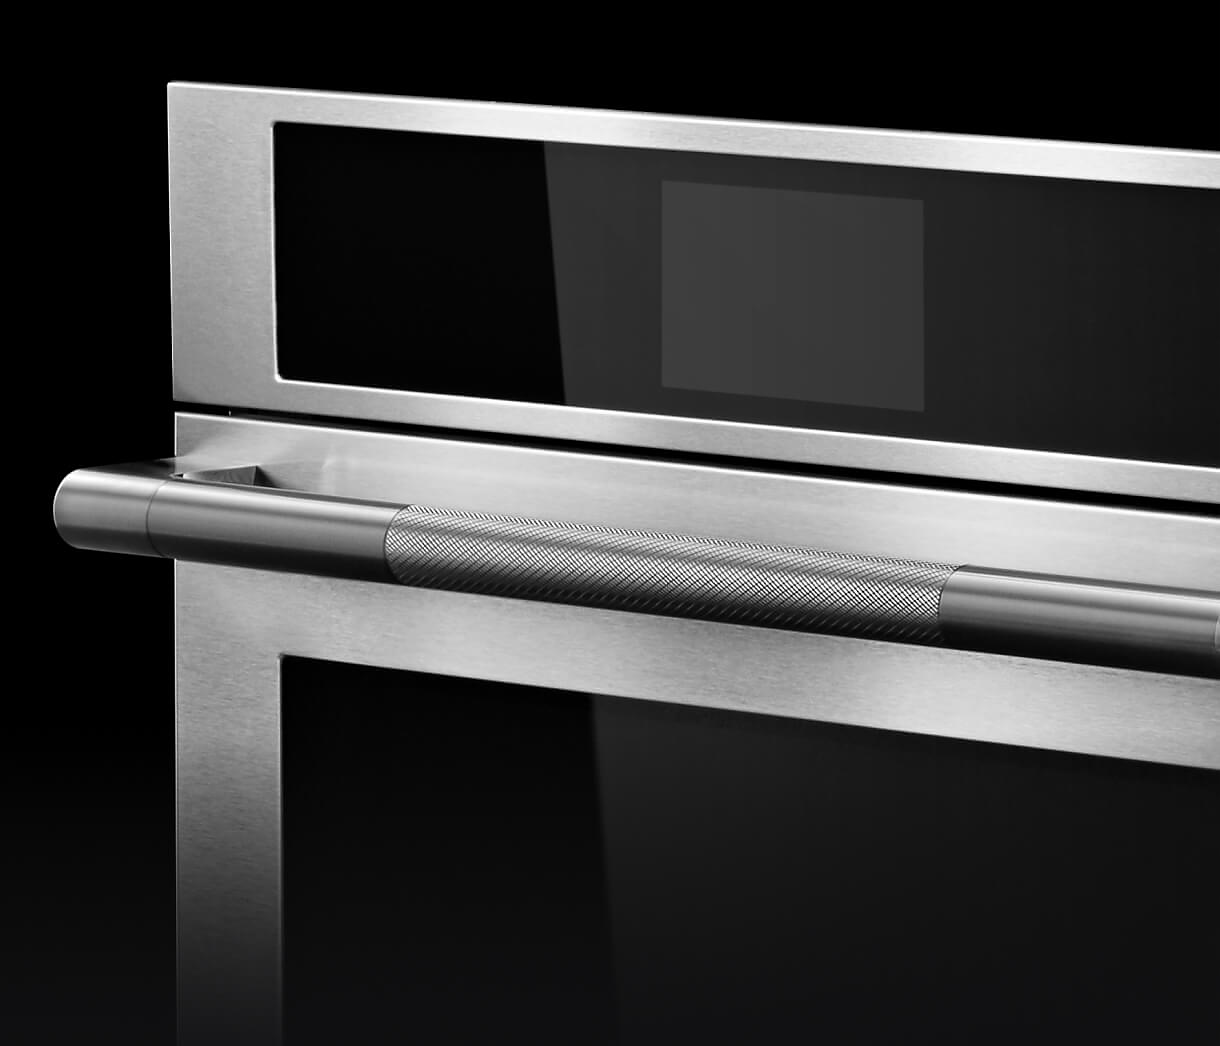 A close up of the knurling on the handle of a RISE™ Wall Oven.